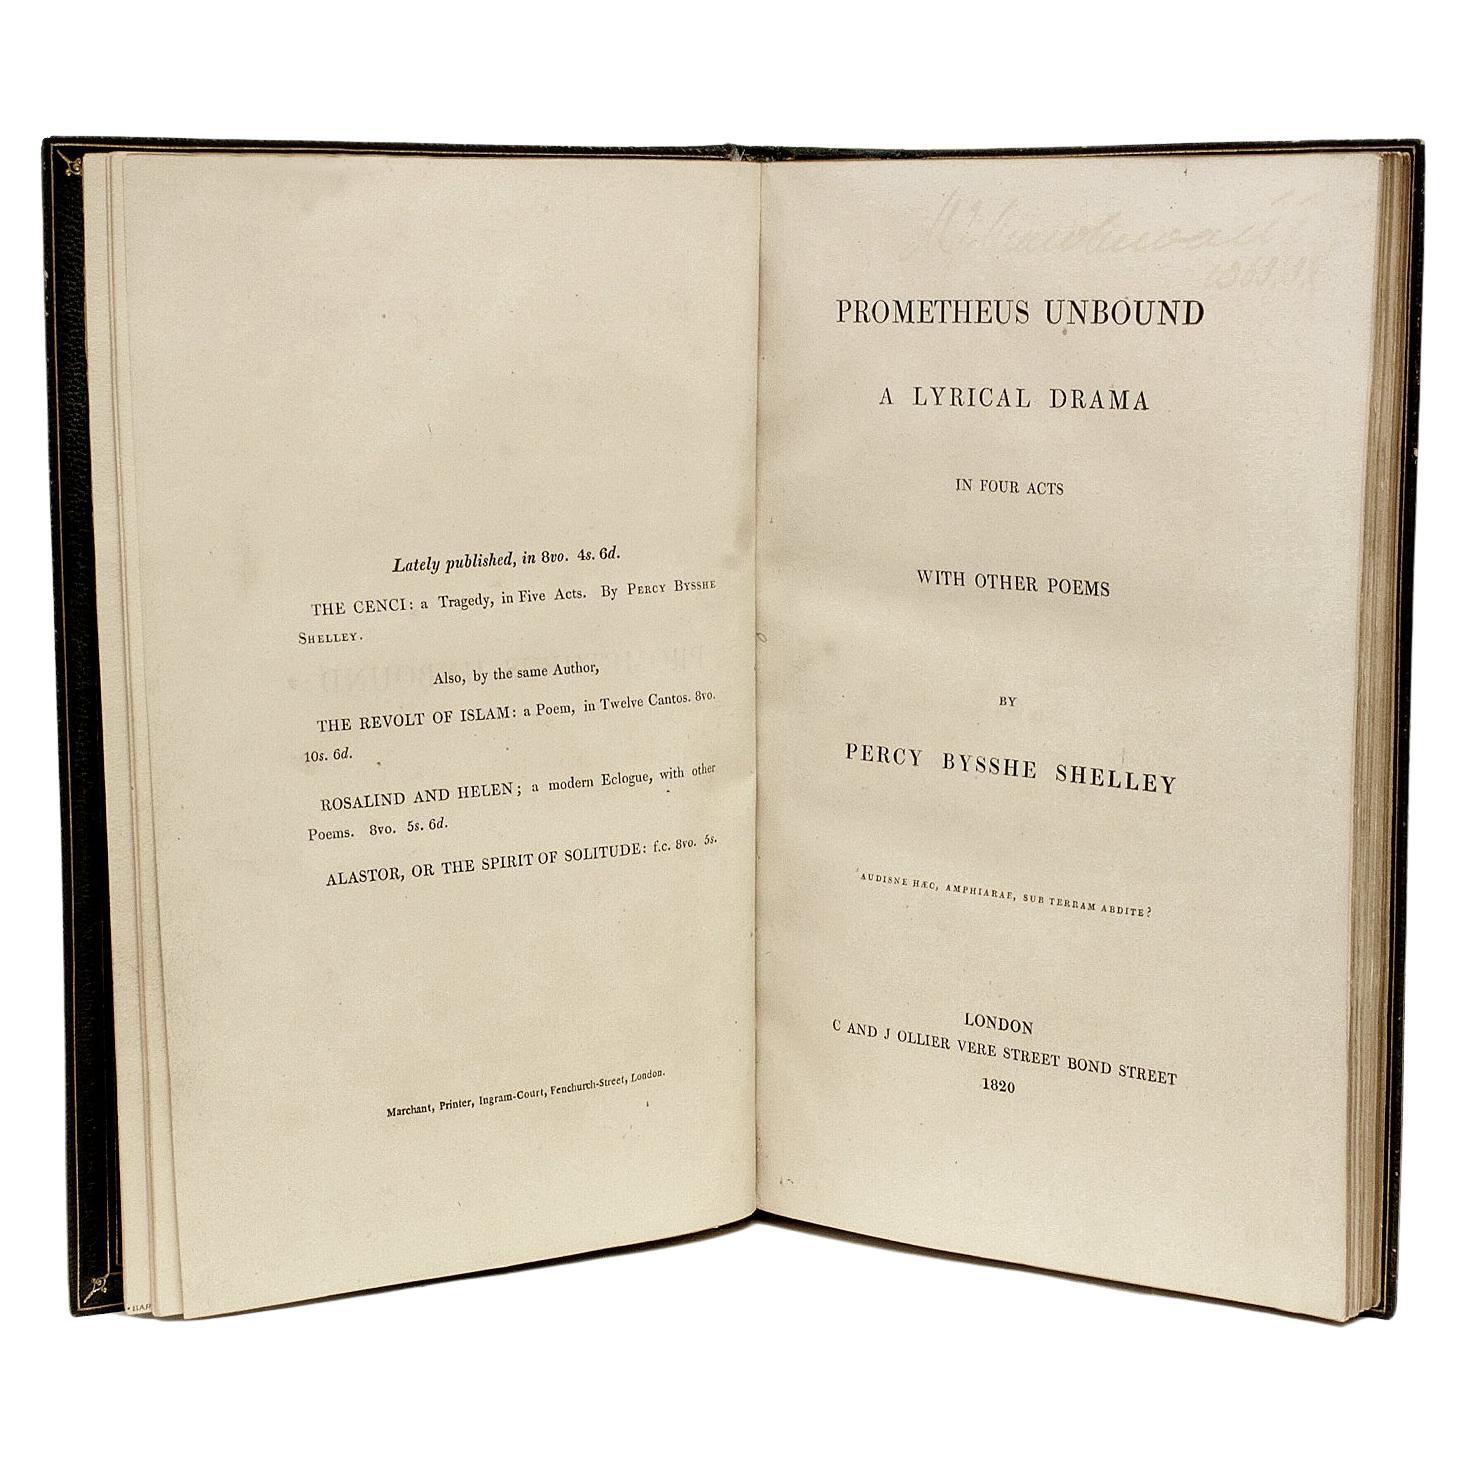 Percy Bysshe Shelley, Prometheus Unbound, First Edition Second Issue, 1820